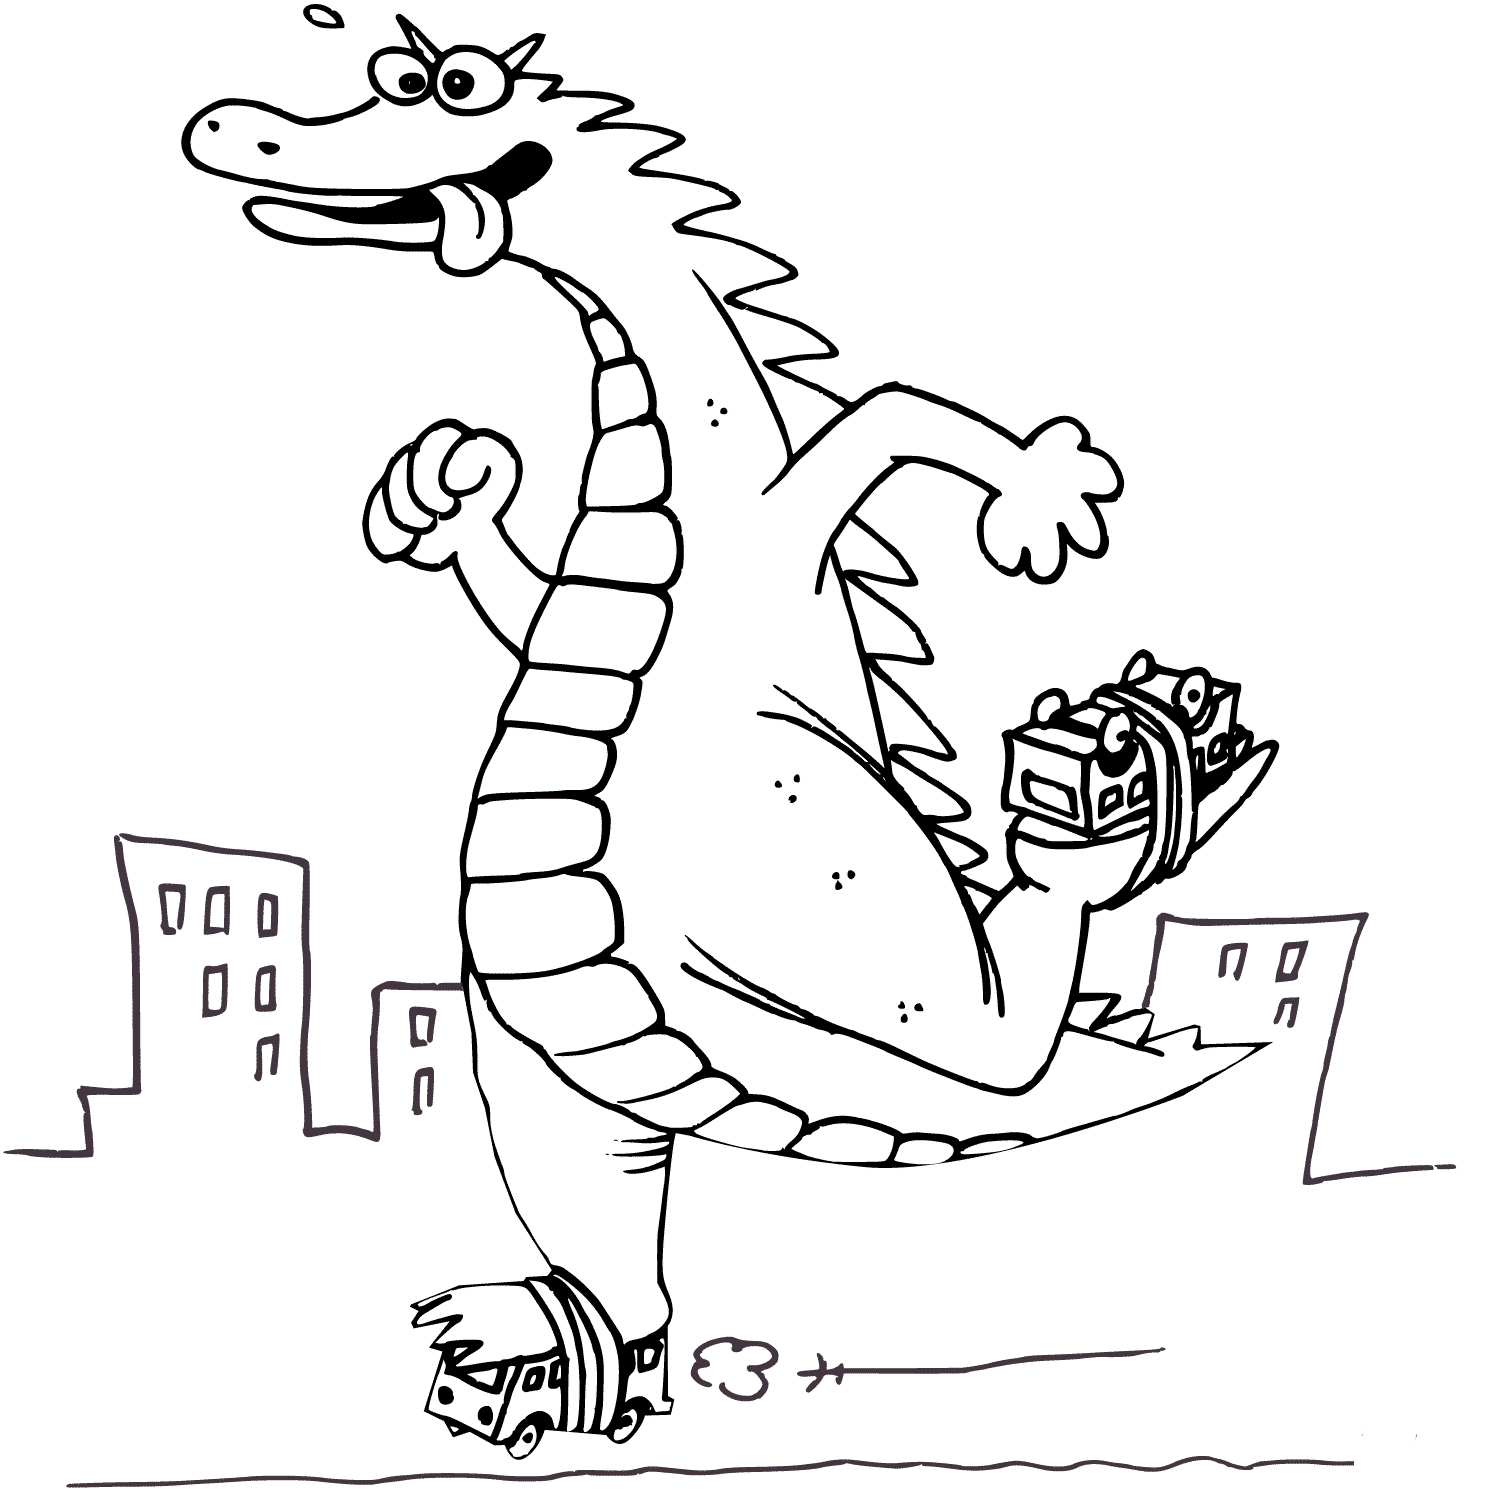 Funny Godzilla Coloring Pages